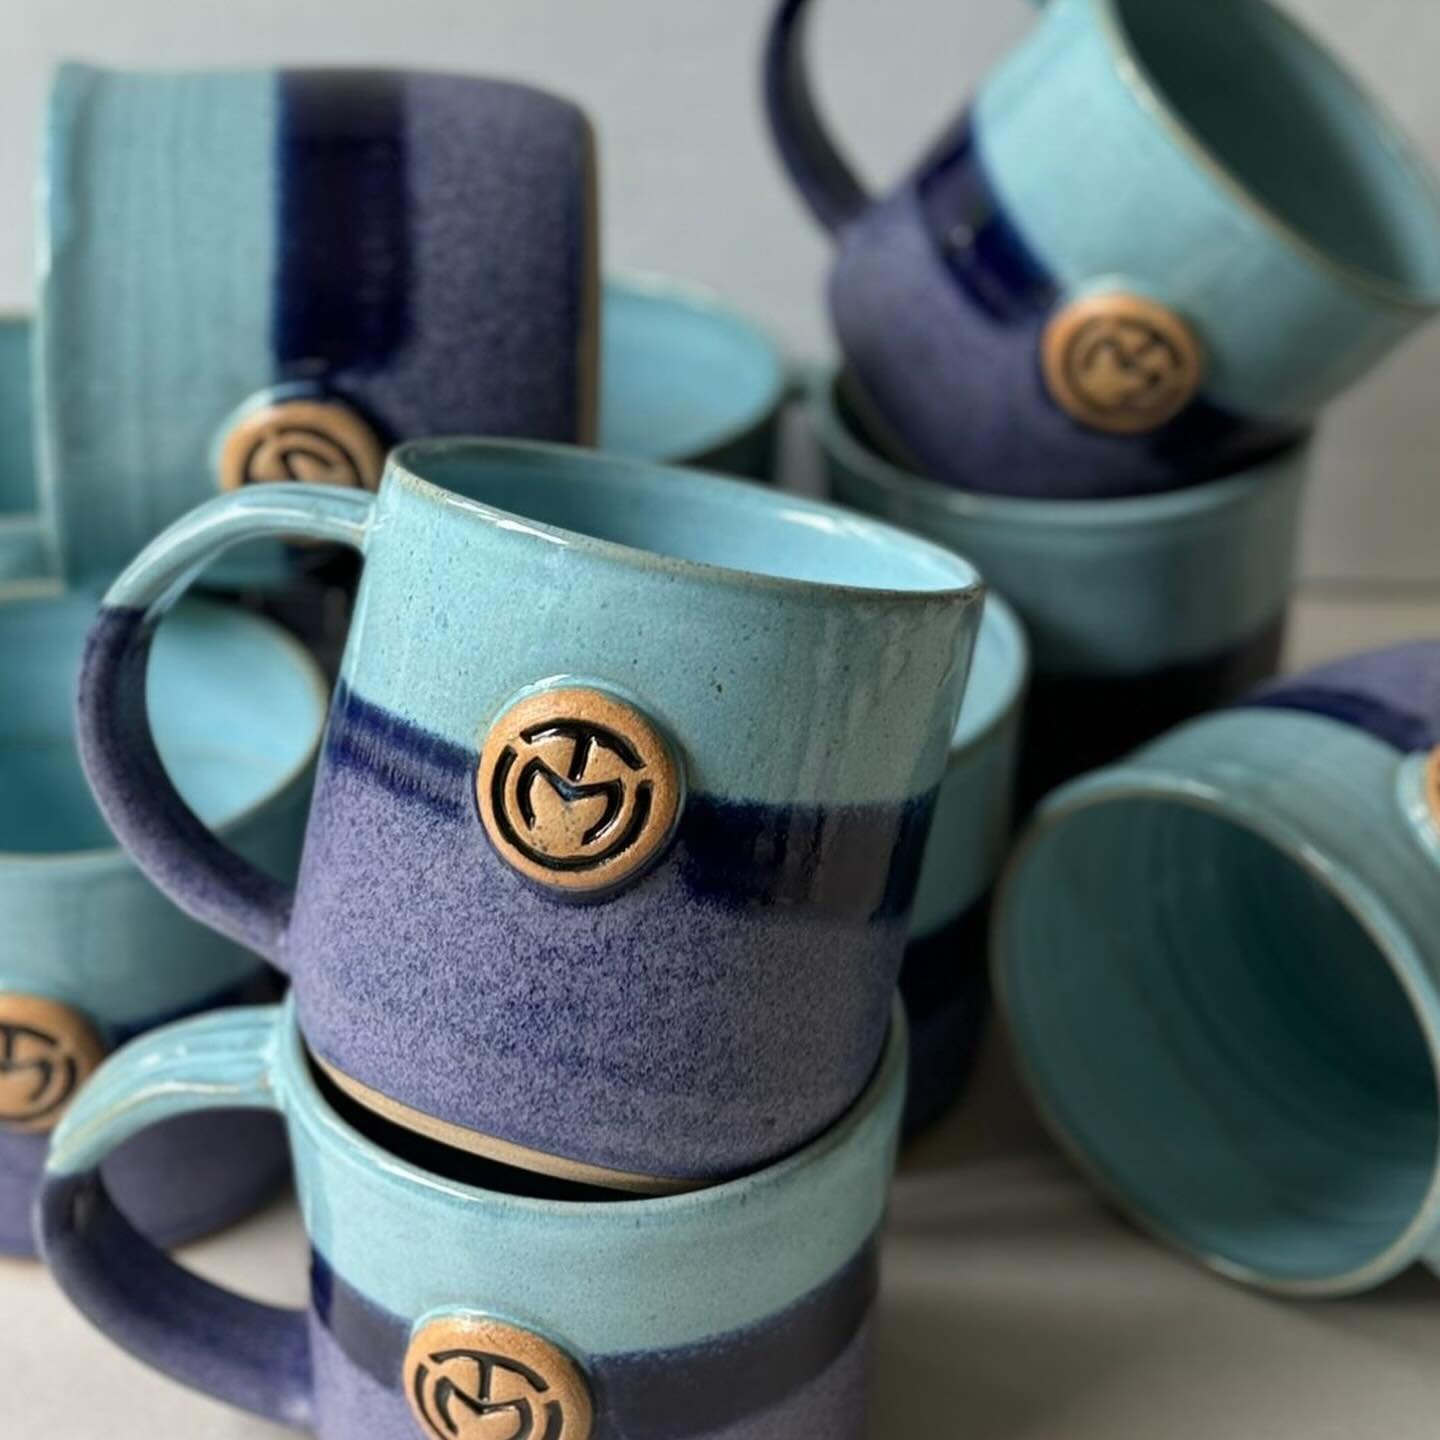 New Torque Mugs inbound from the very talented @parkgatepottery - by the way if you ever fancy trying your hand at throwing a pot they do private workshops - great fun - #localbusiness #skils #handcrafted #notmadeinchina